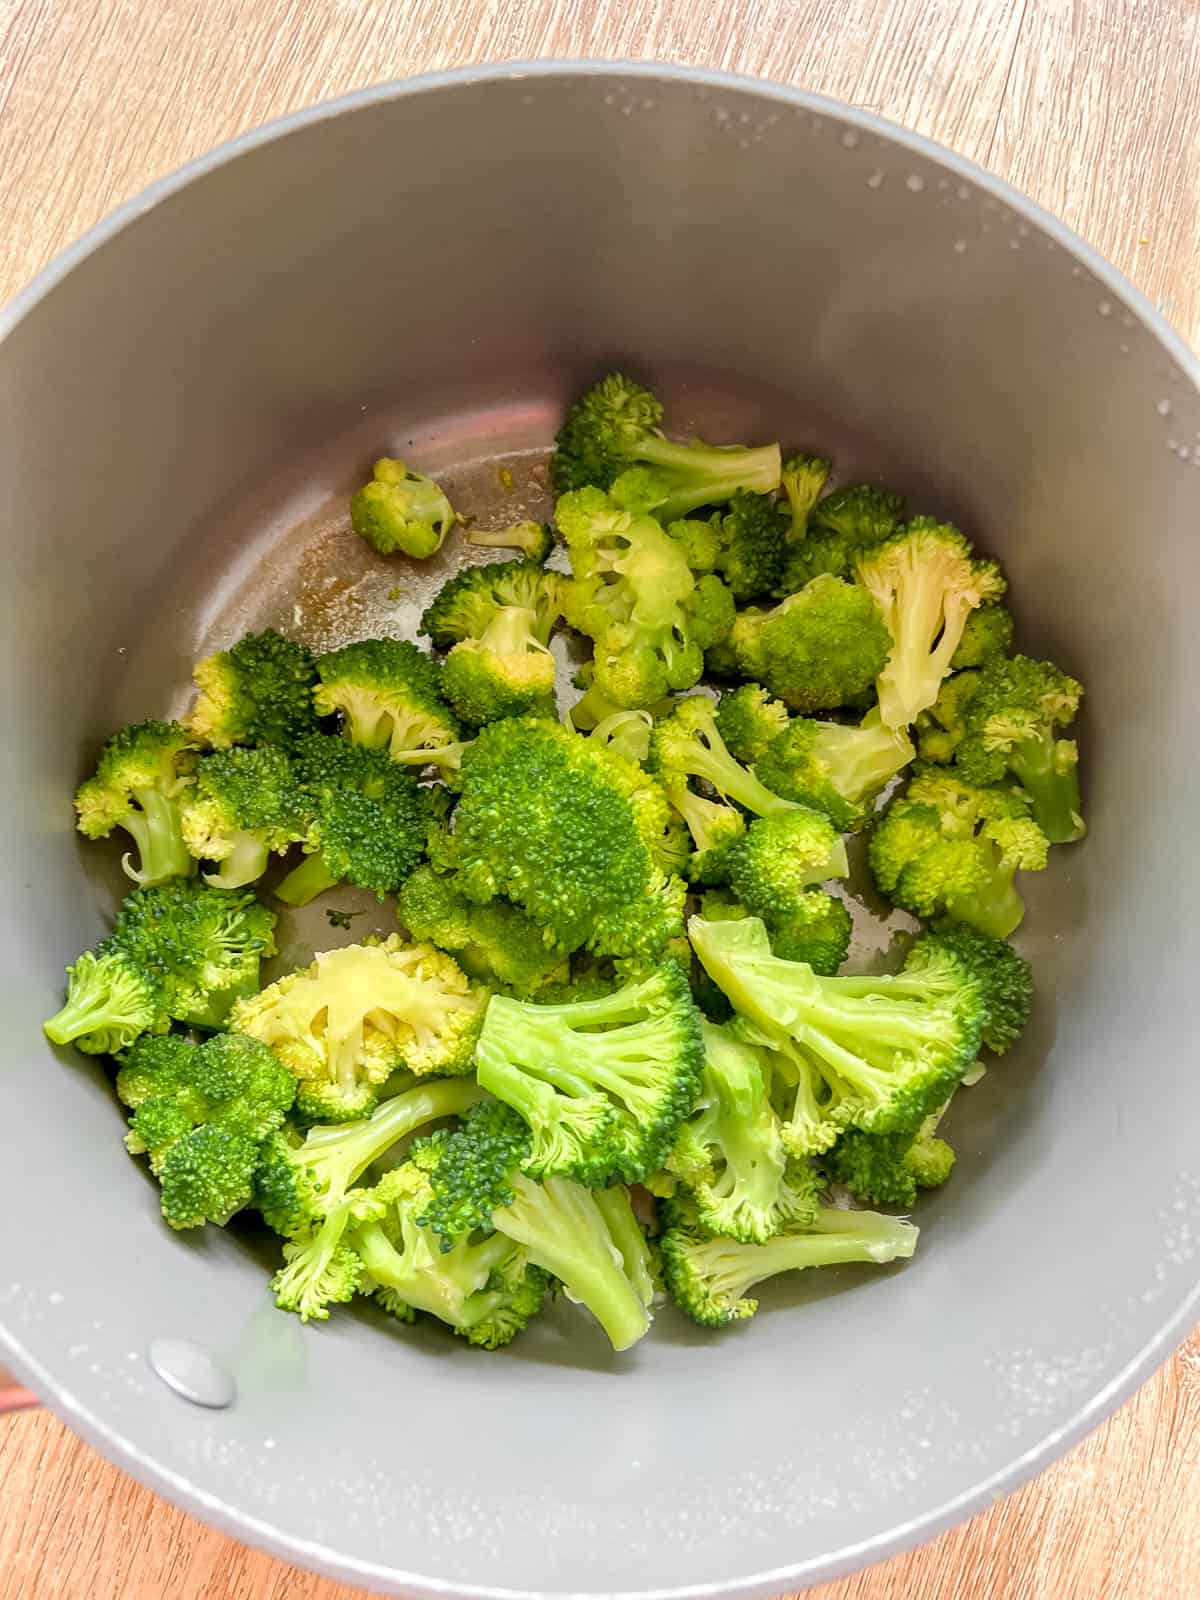 Steamed broccoli in a pan.